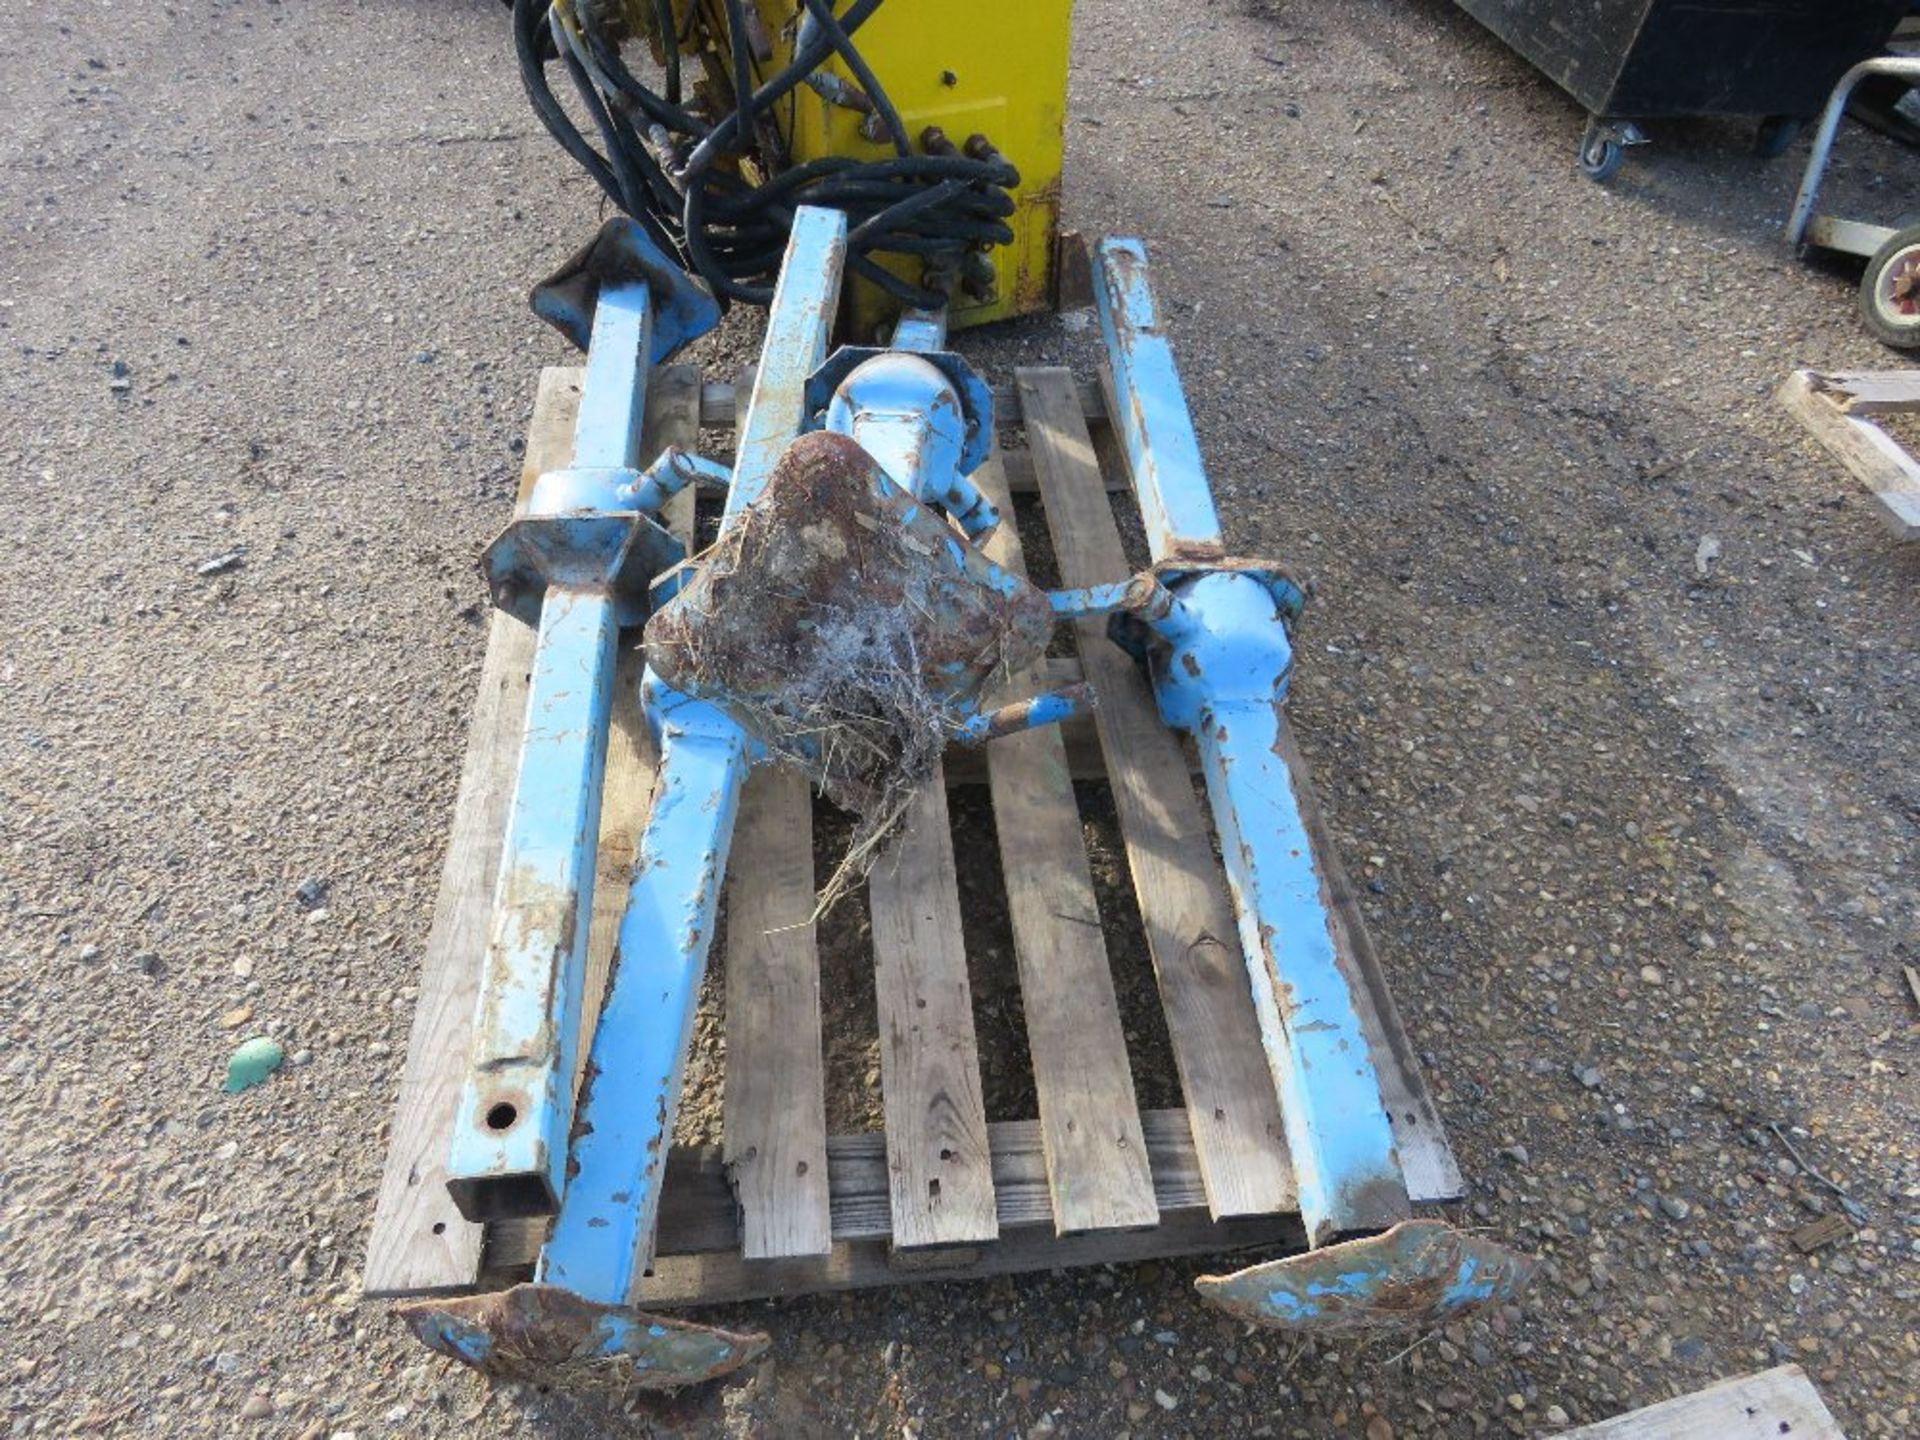 4 X ADJUSTABLE SUPPORT LEGS, 4FT CLOSED LENGTH APPROX. THIS LOT IS SOLD UNDER THE AUCTIONEERS MA - Image 3 of 5